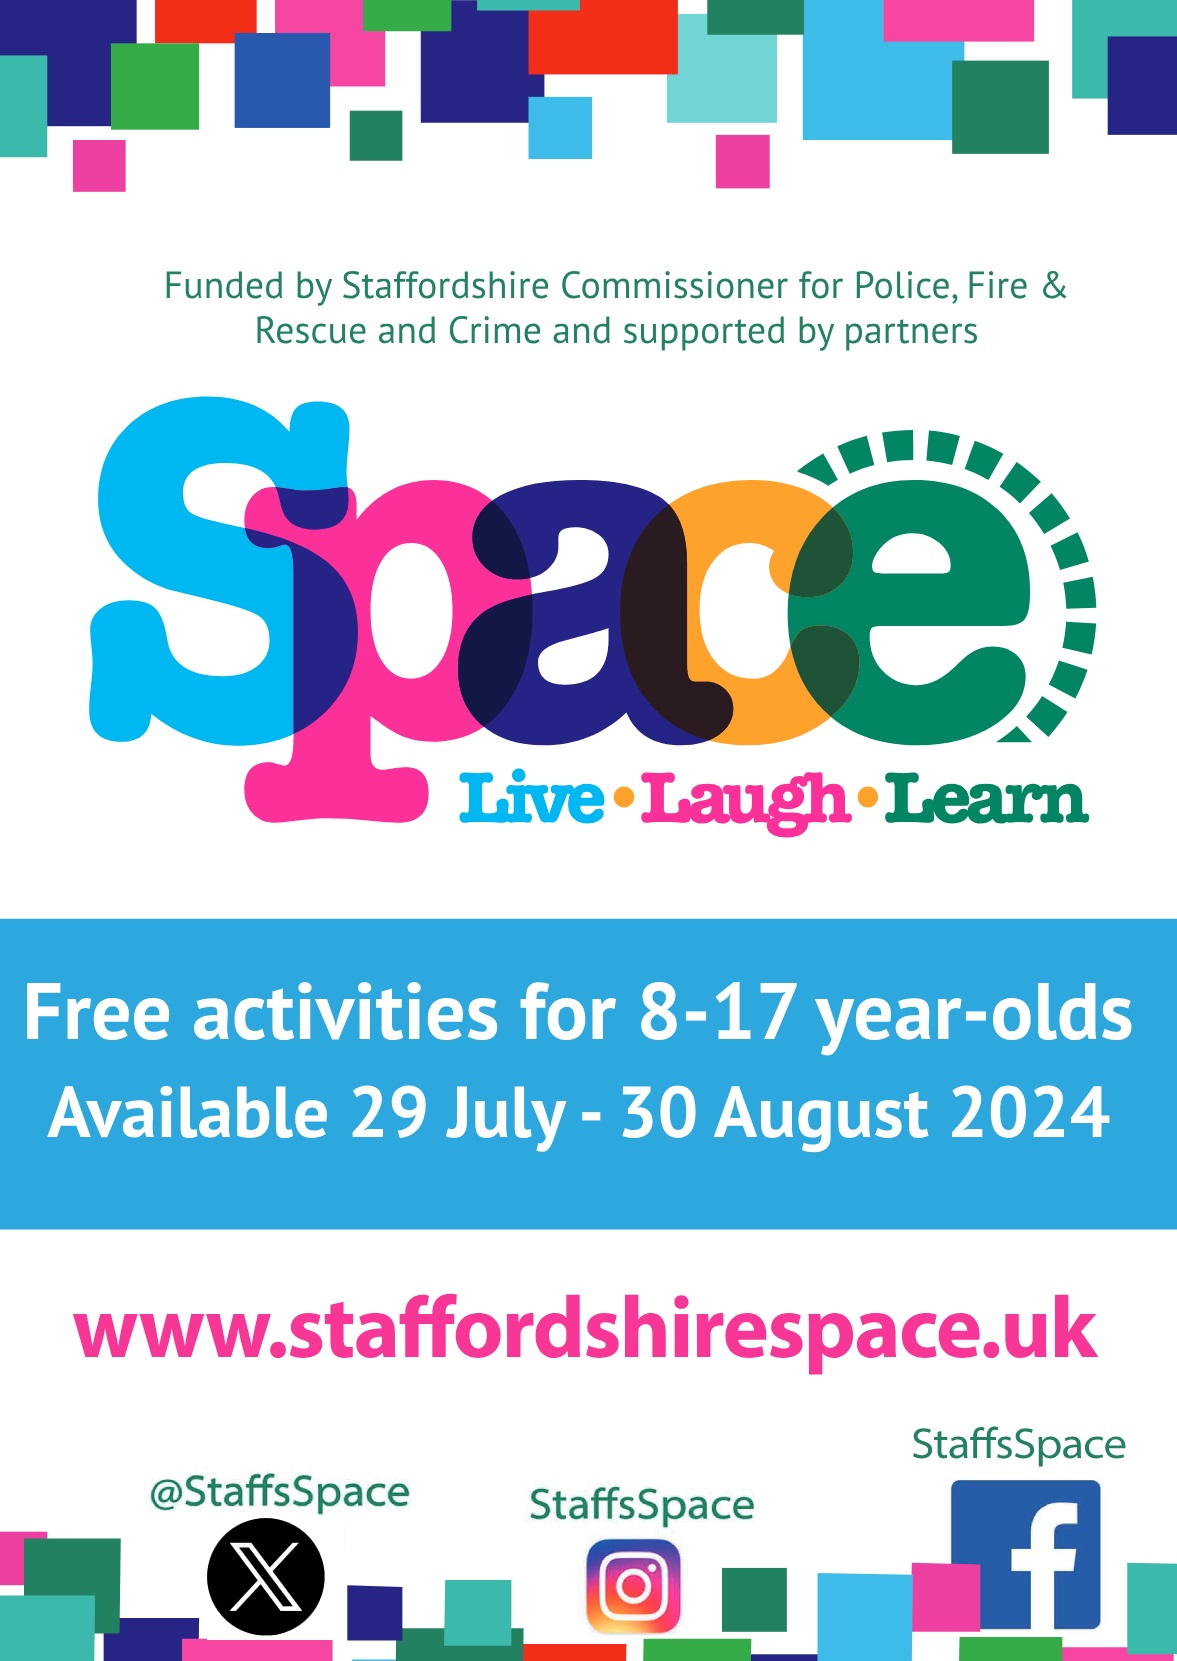 Free activities for 8-17 year olds in the Cannock district available 29th July to 30th August 2024